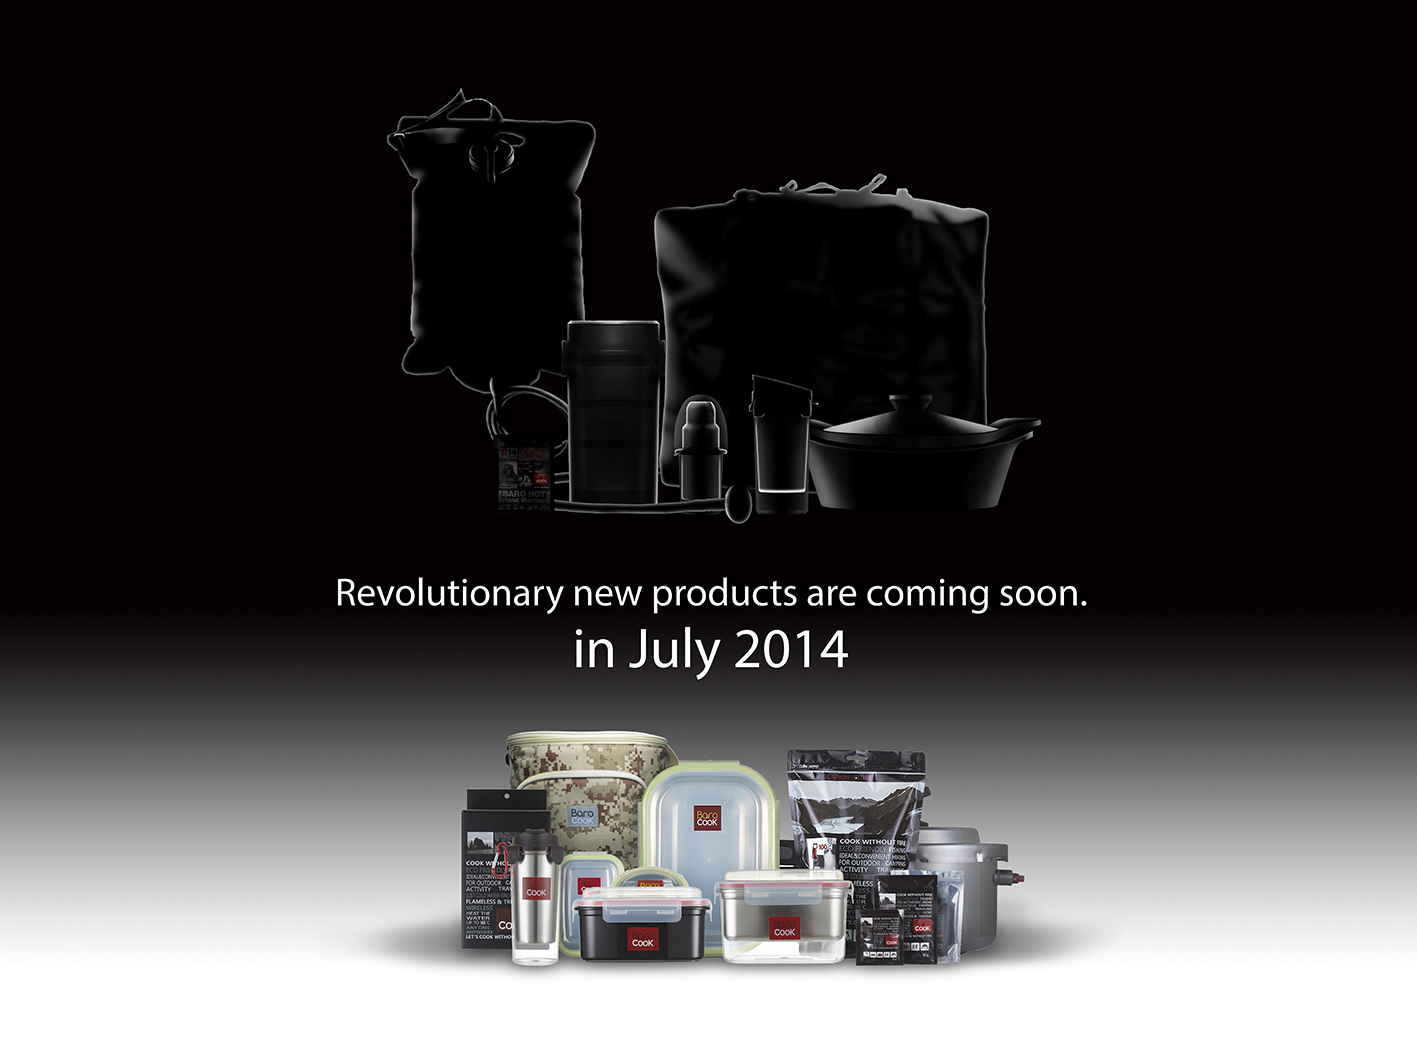 Revolutionary new products are coming soon